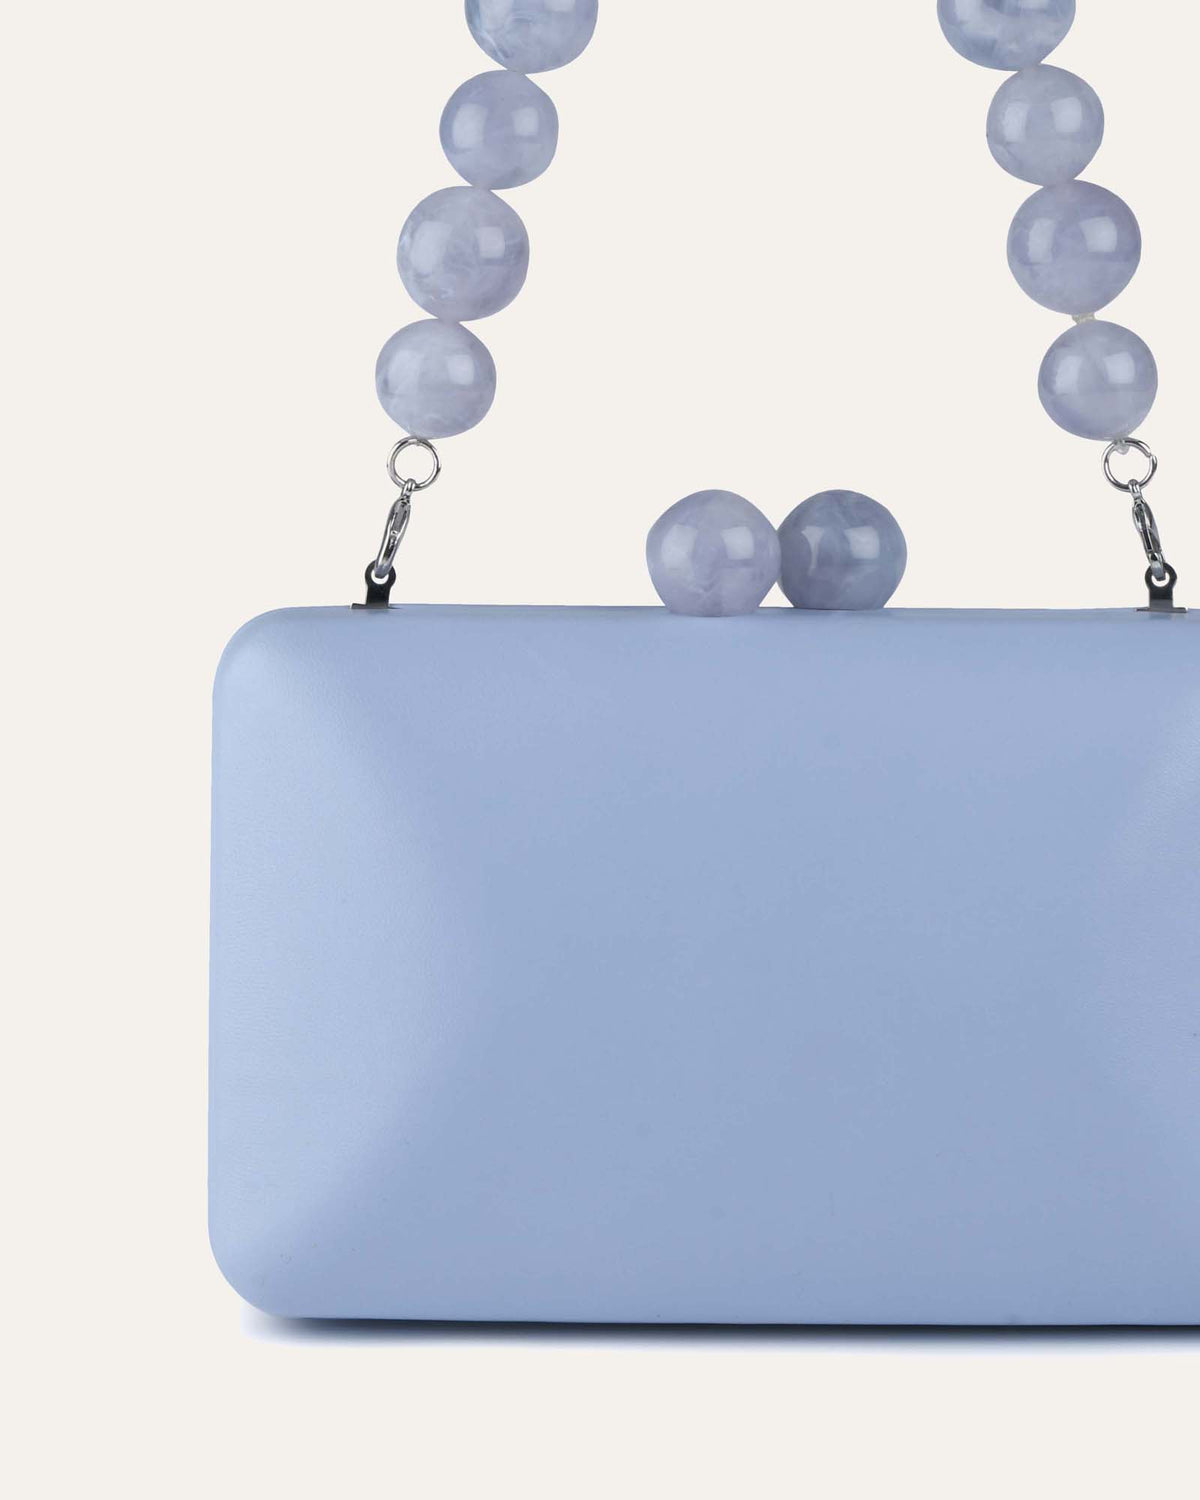 HARLING CLUTCH ICE BLUE LEATHER